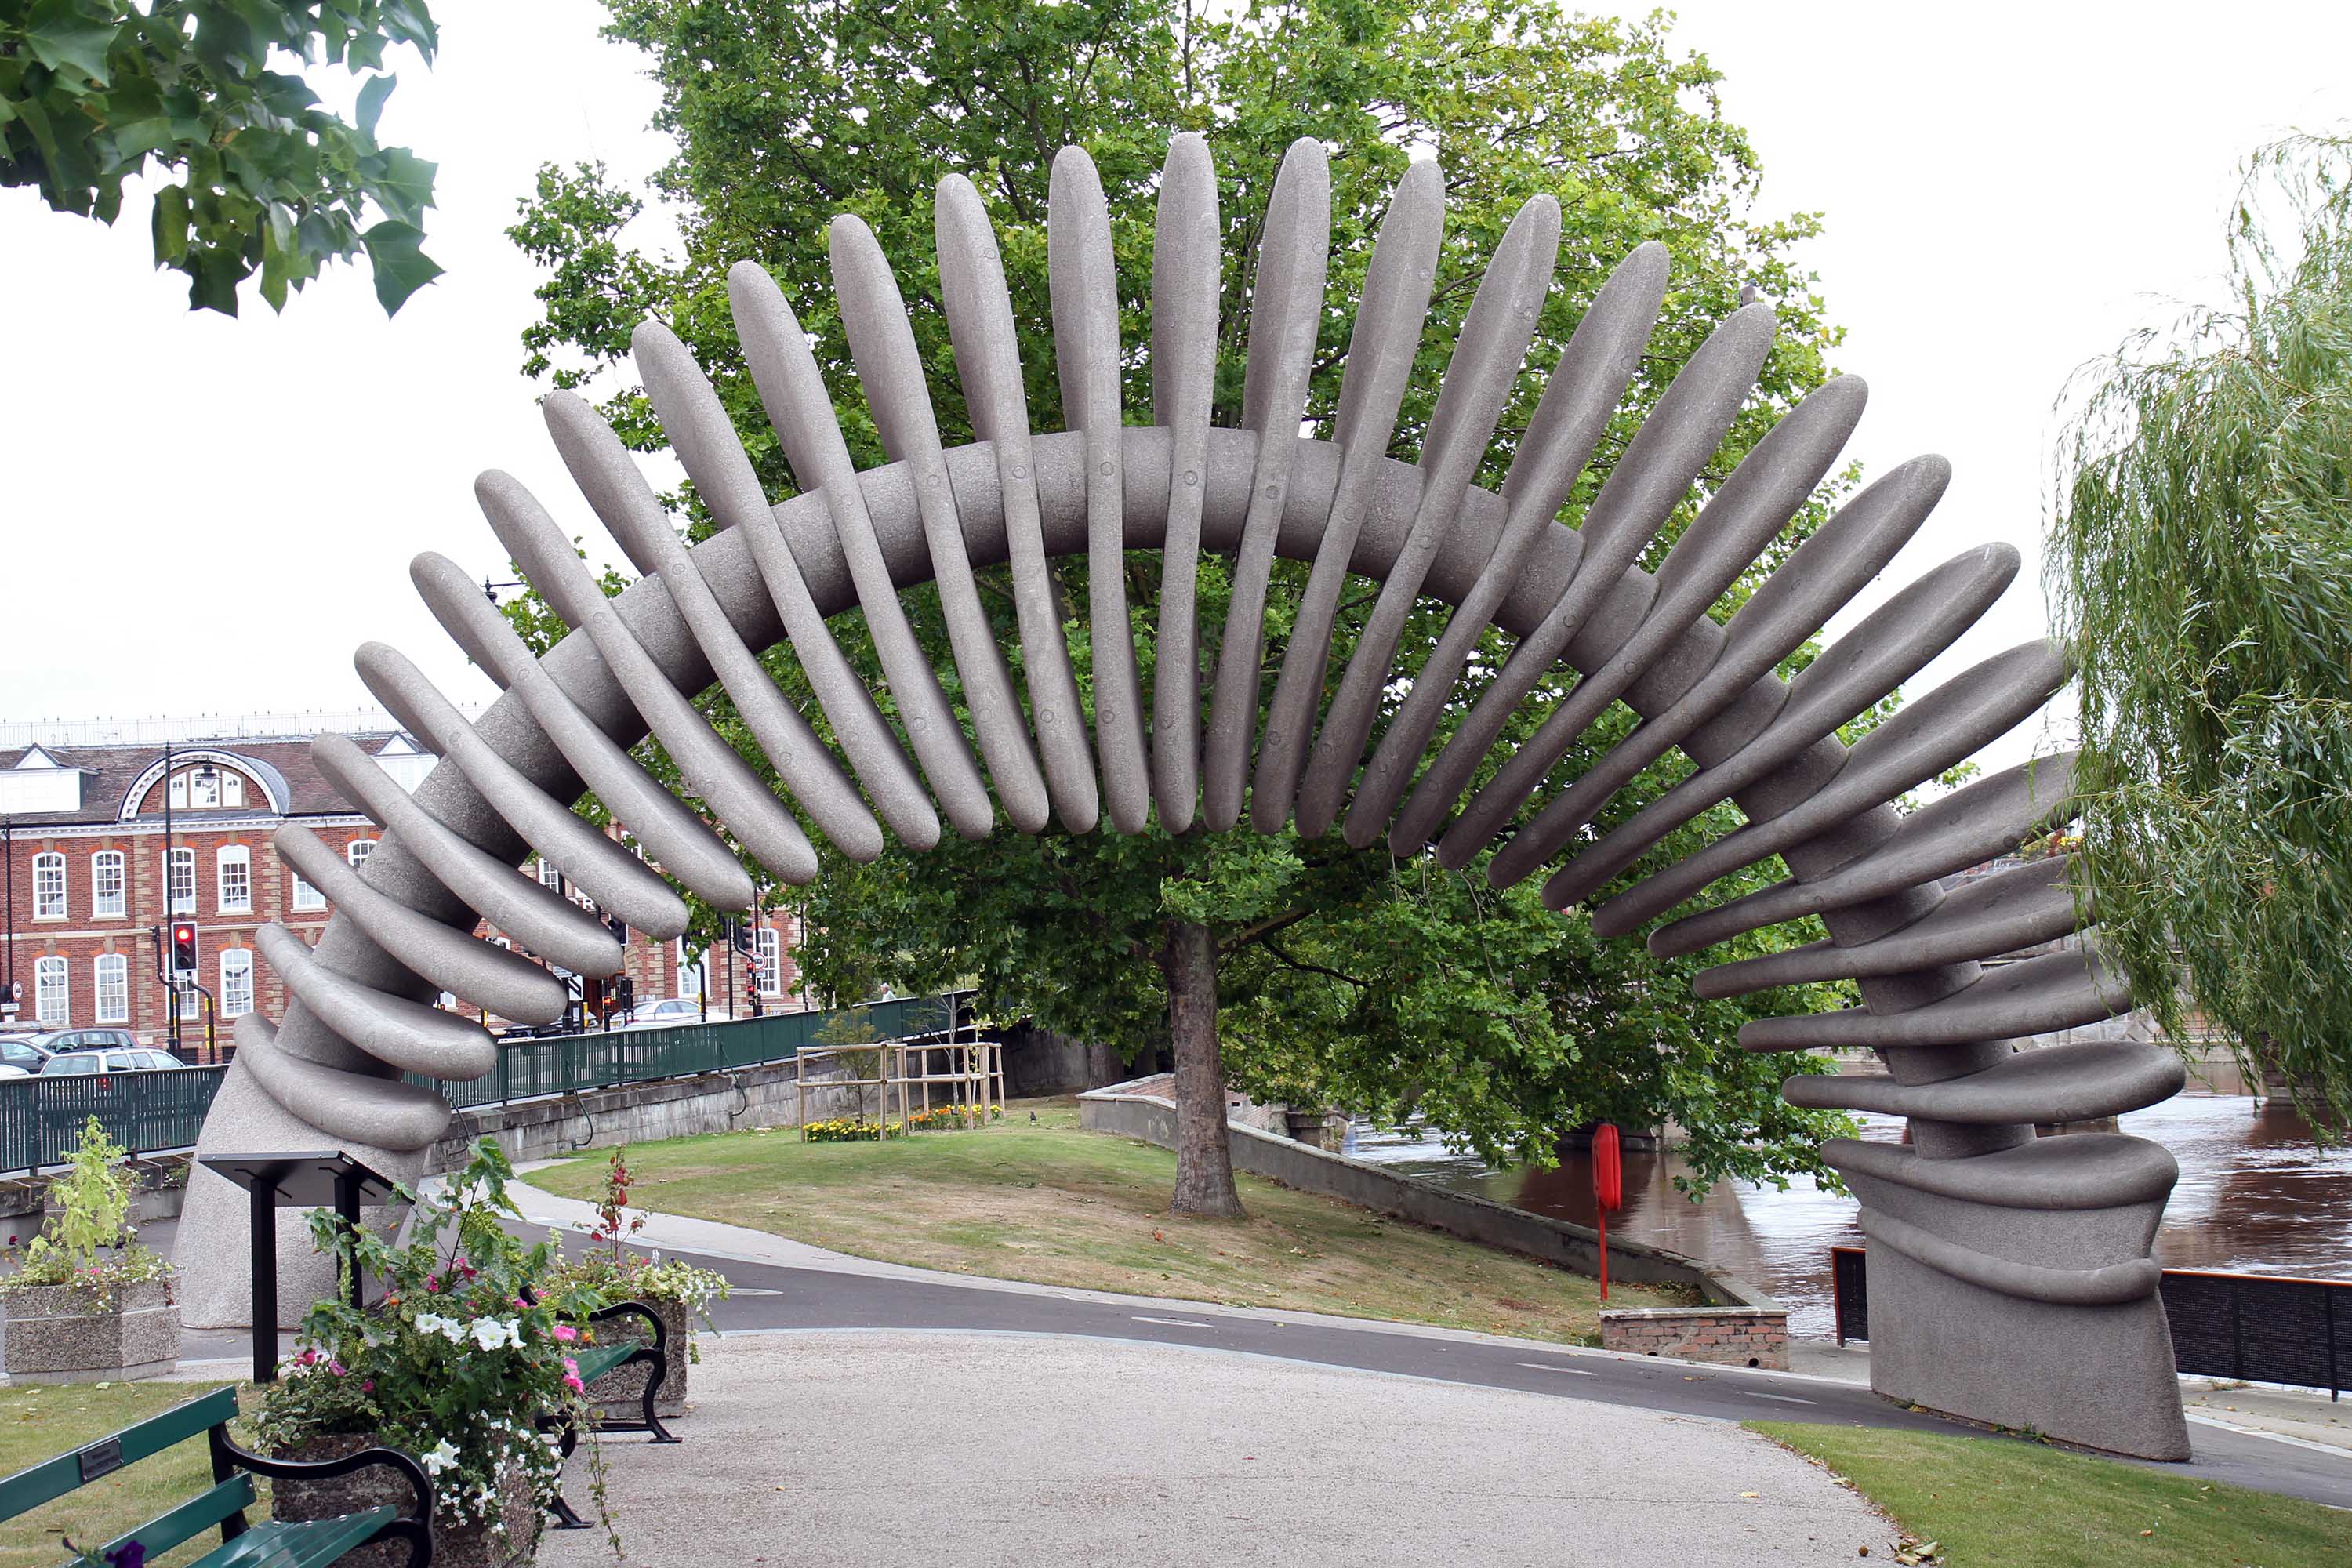 Cash-strapped council pay £1million for ‘slinky’ sculpture eye-sore